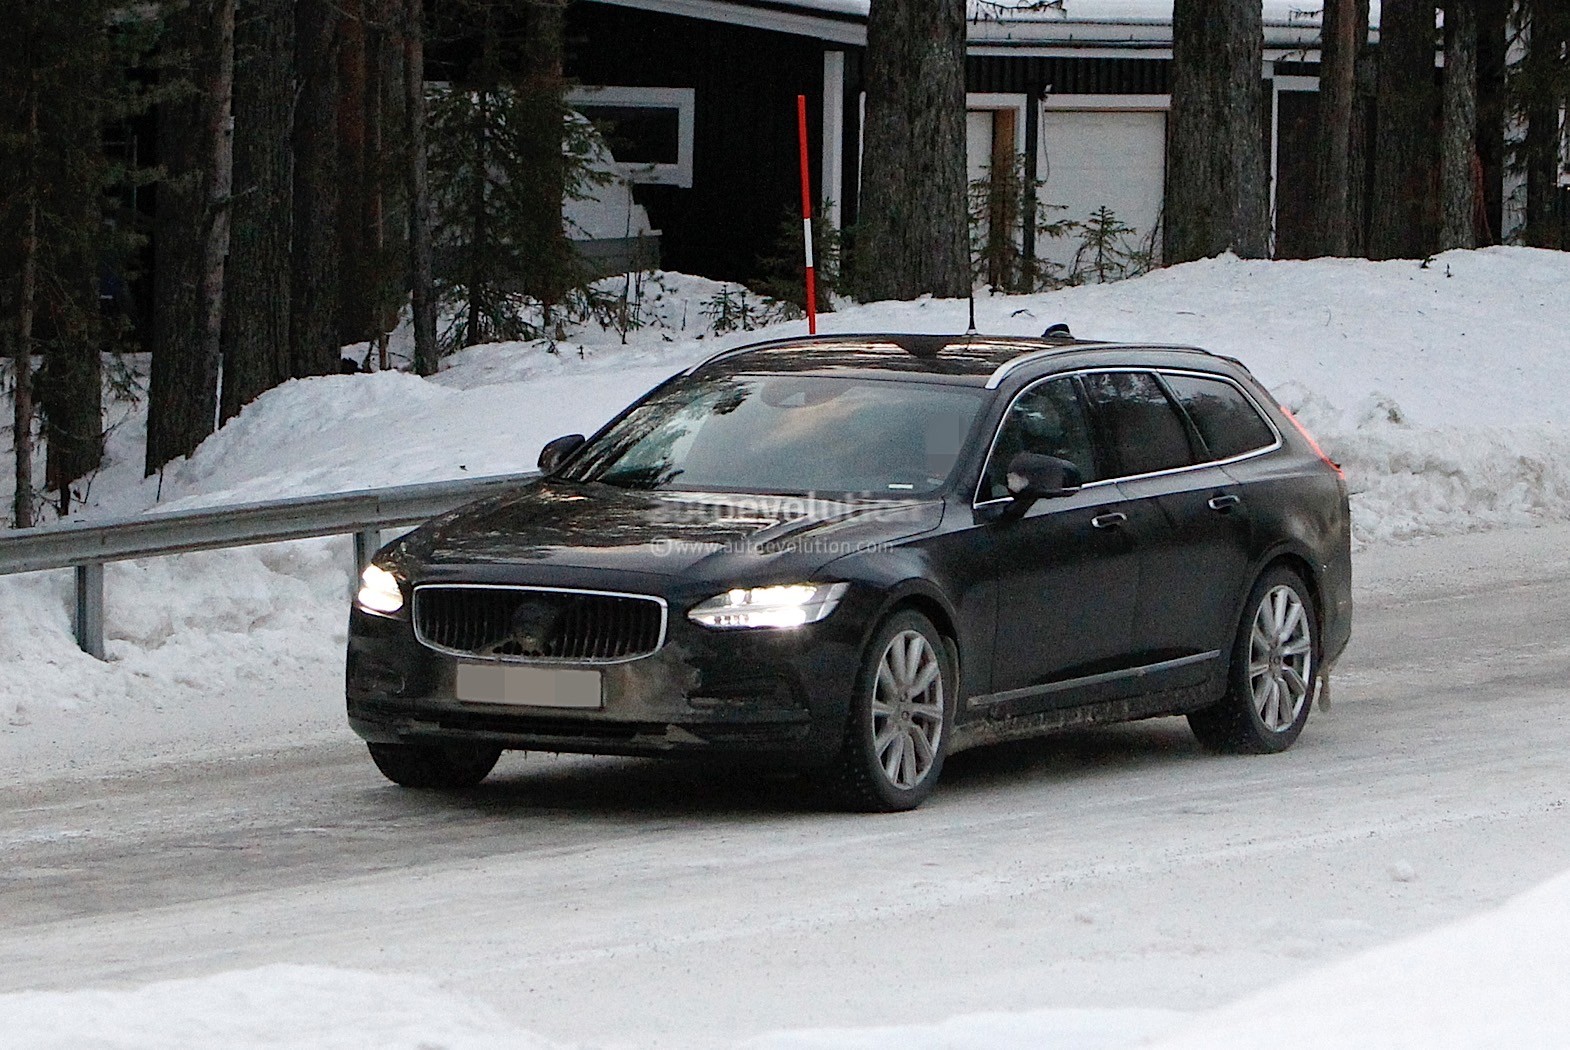 https://s1.cdn.autoevolution.com/images/news/gallery/2021-volvo-s90-and-v90-facelift-wear-useless-camouflage-winter-testing_6.jpg